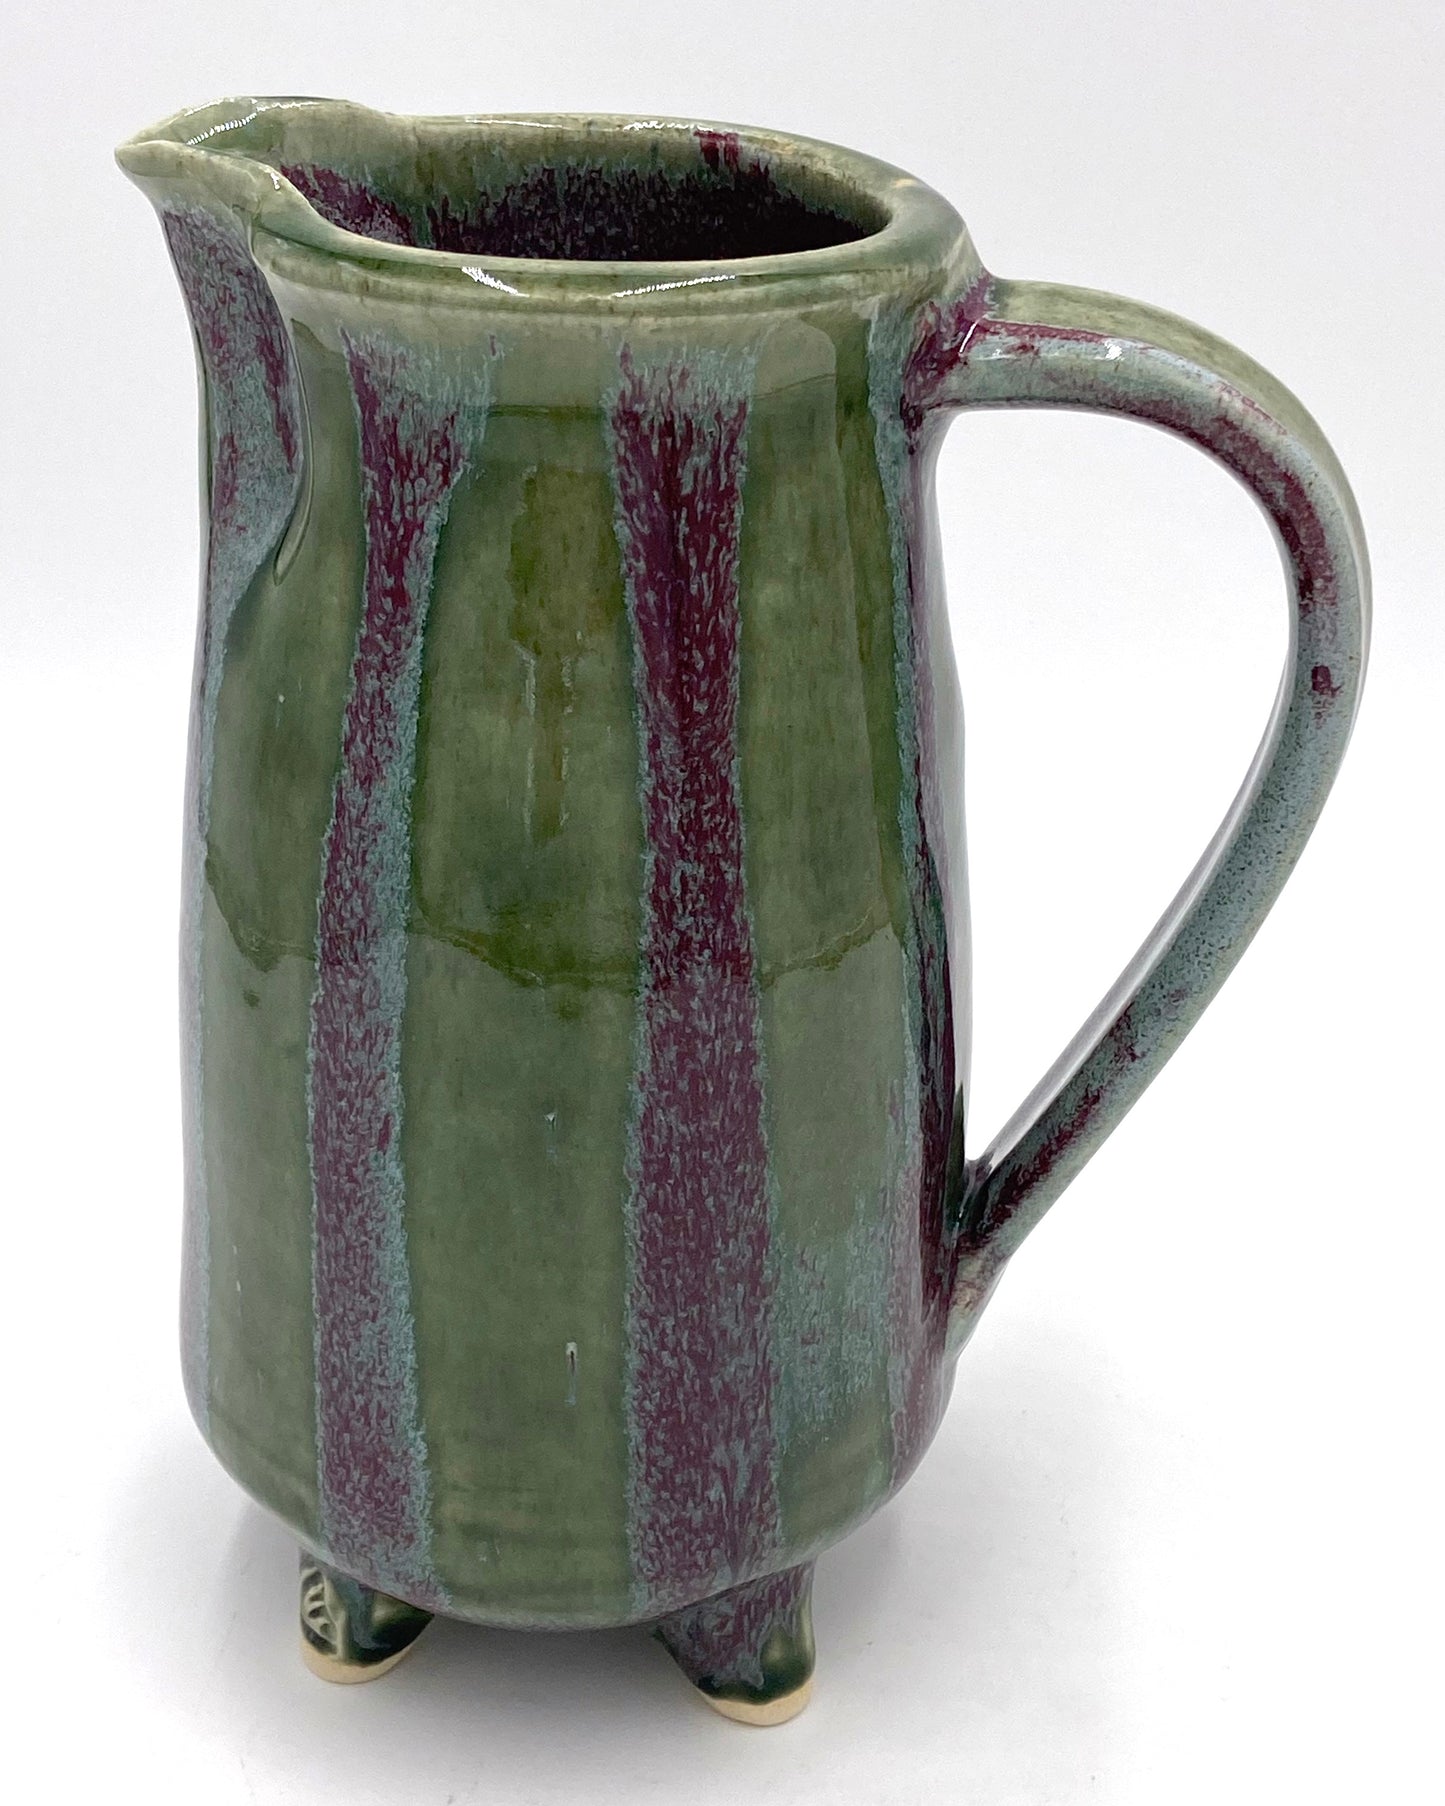 Green and Burgundy Striped Pitcher